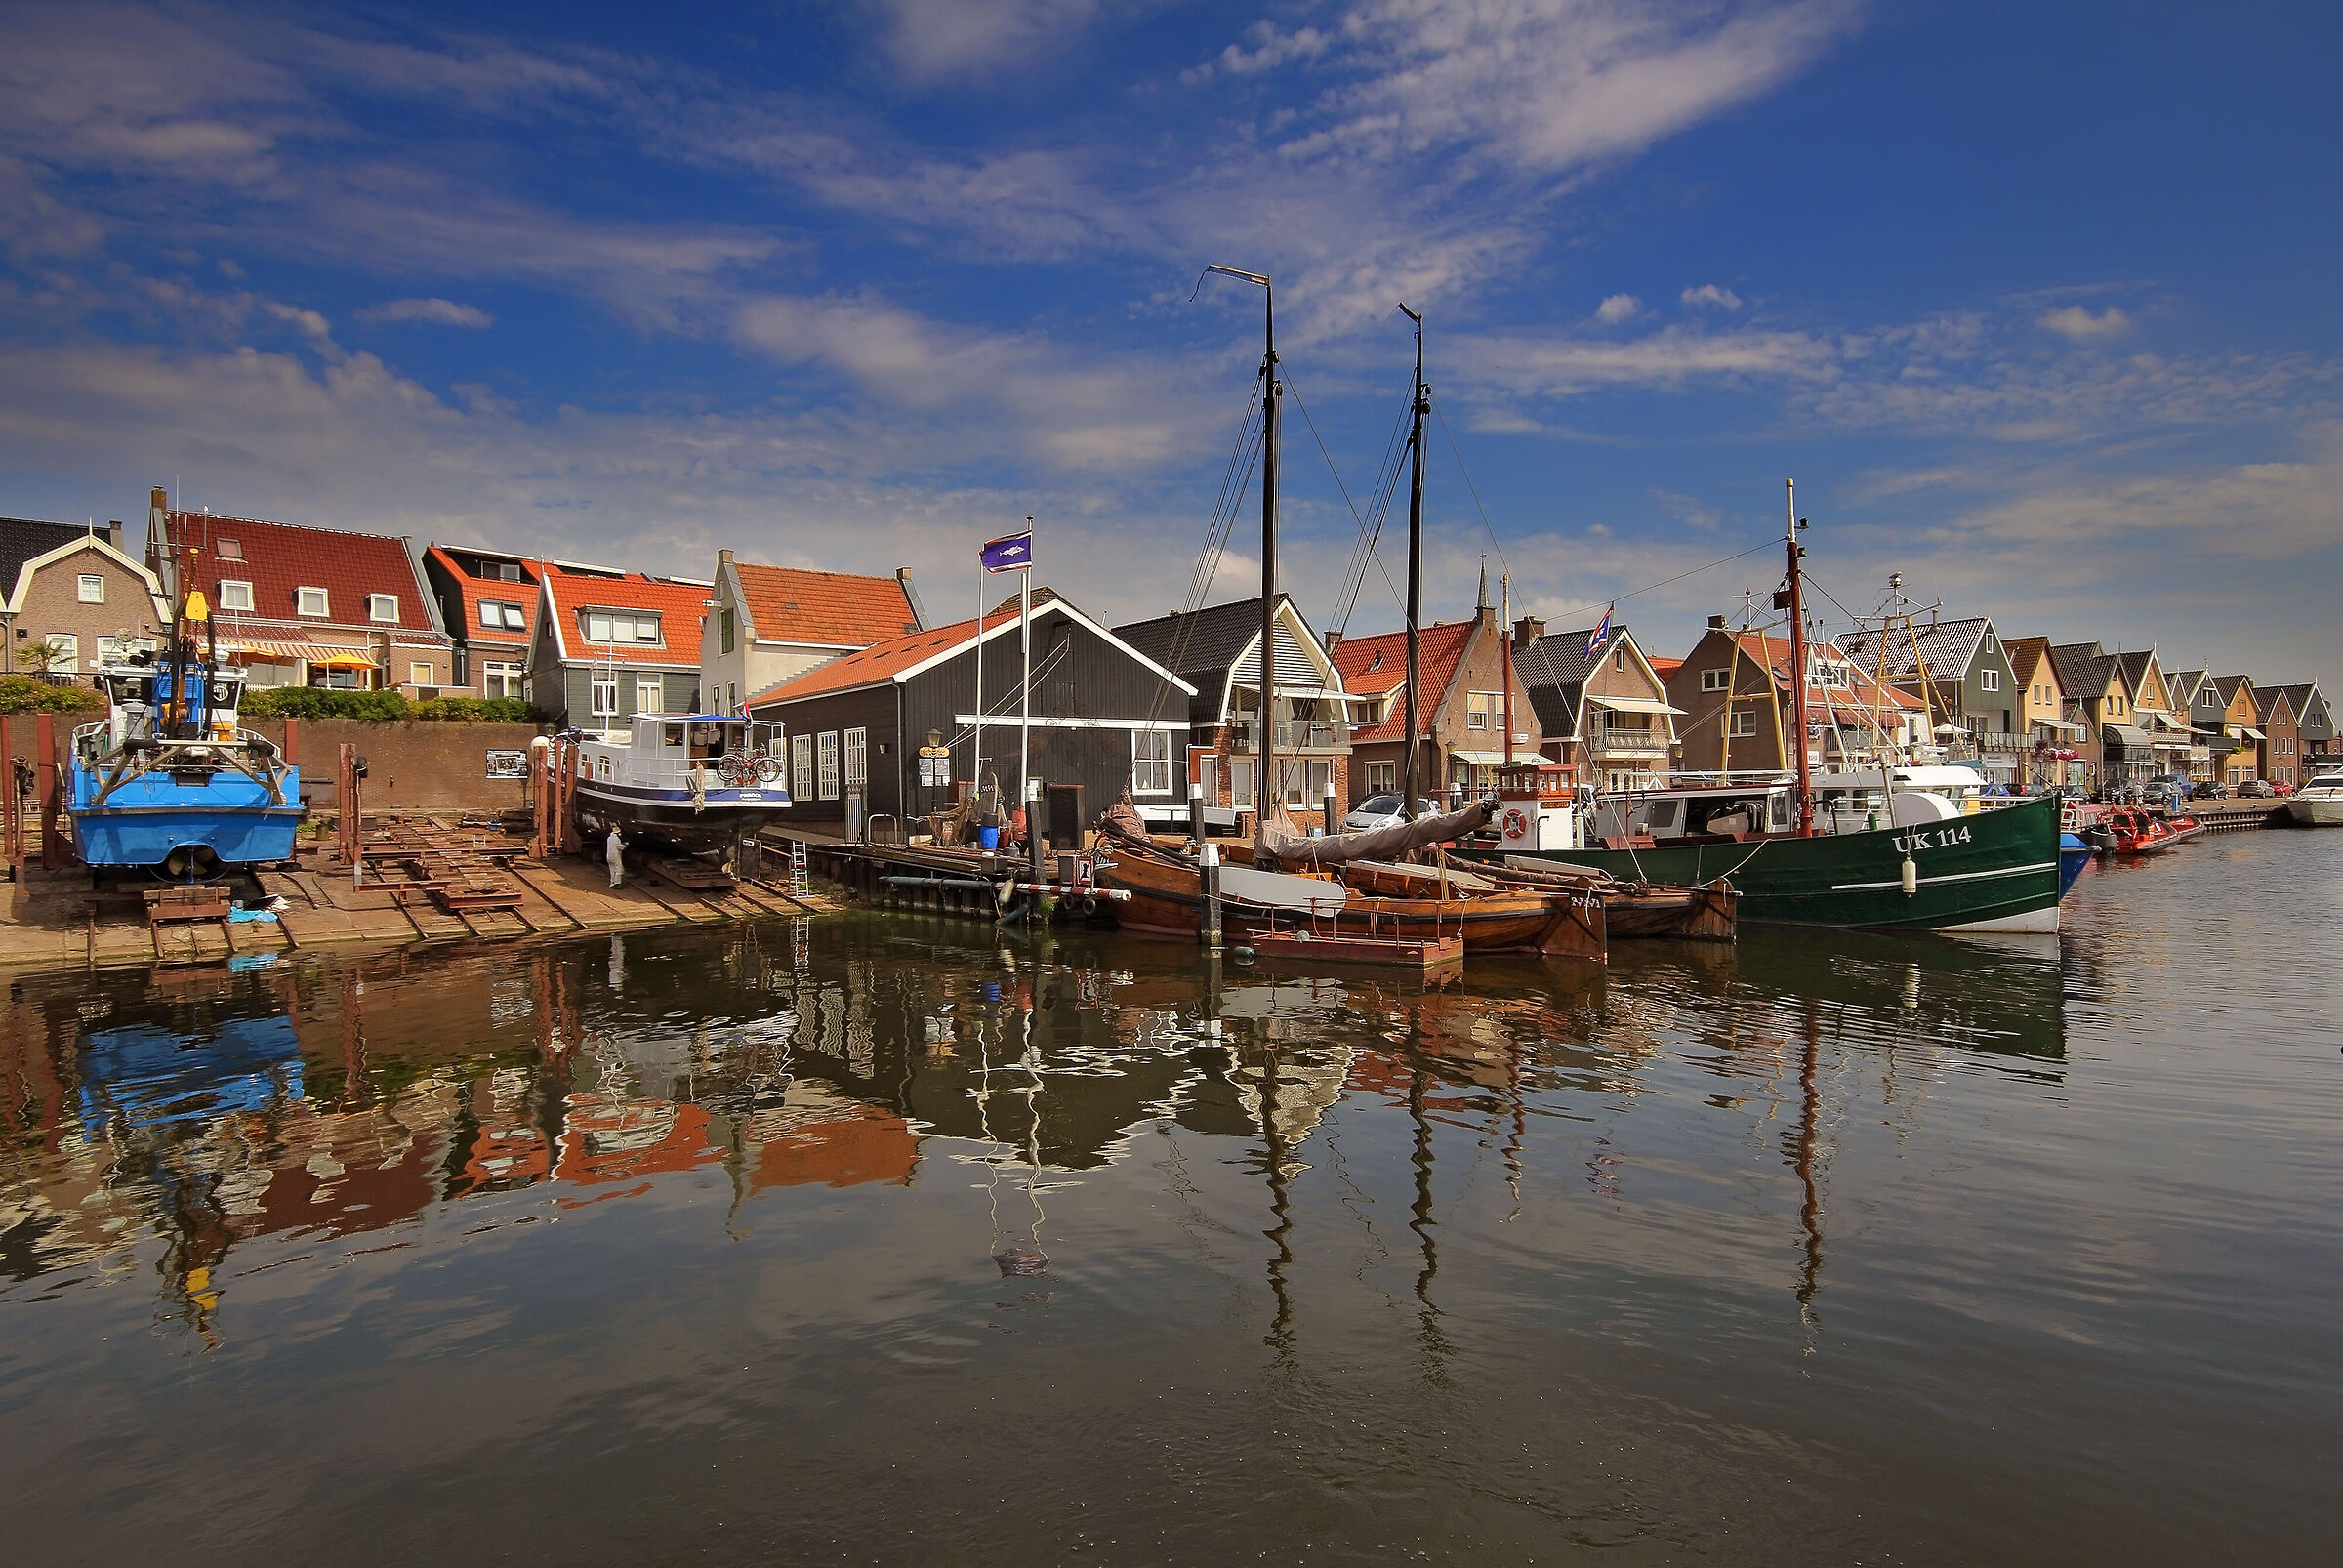 Urk... and the island that is no longer there......